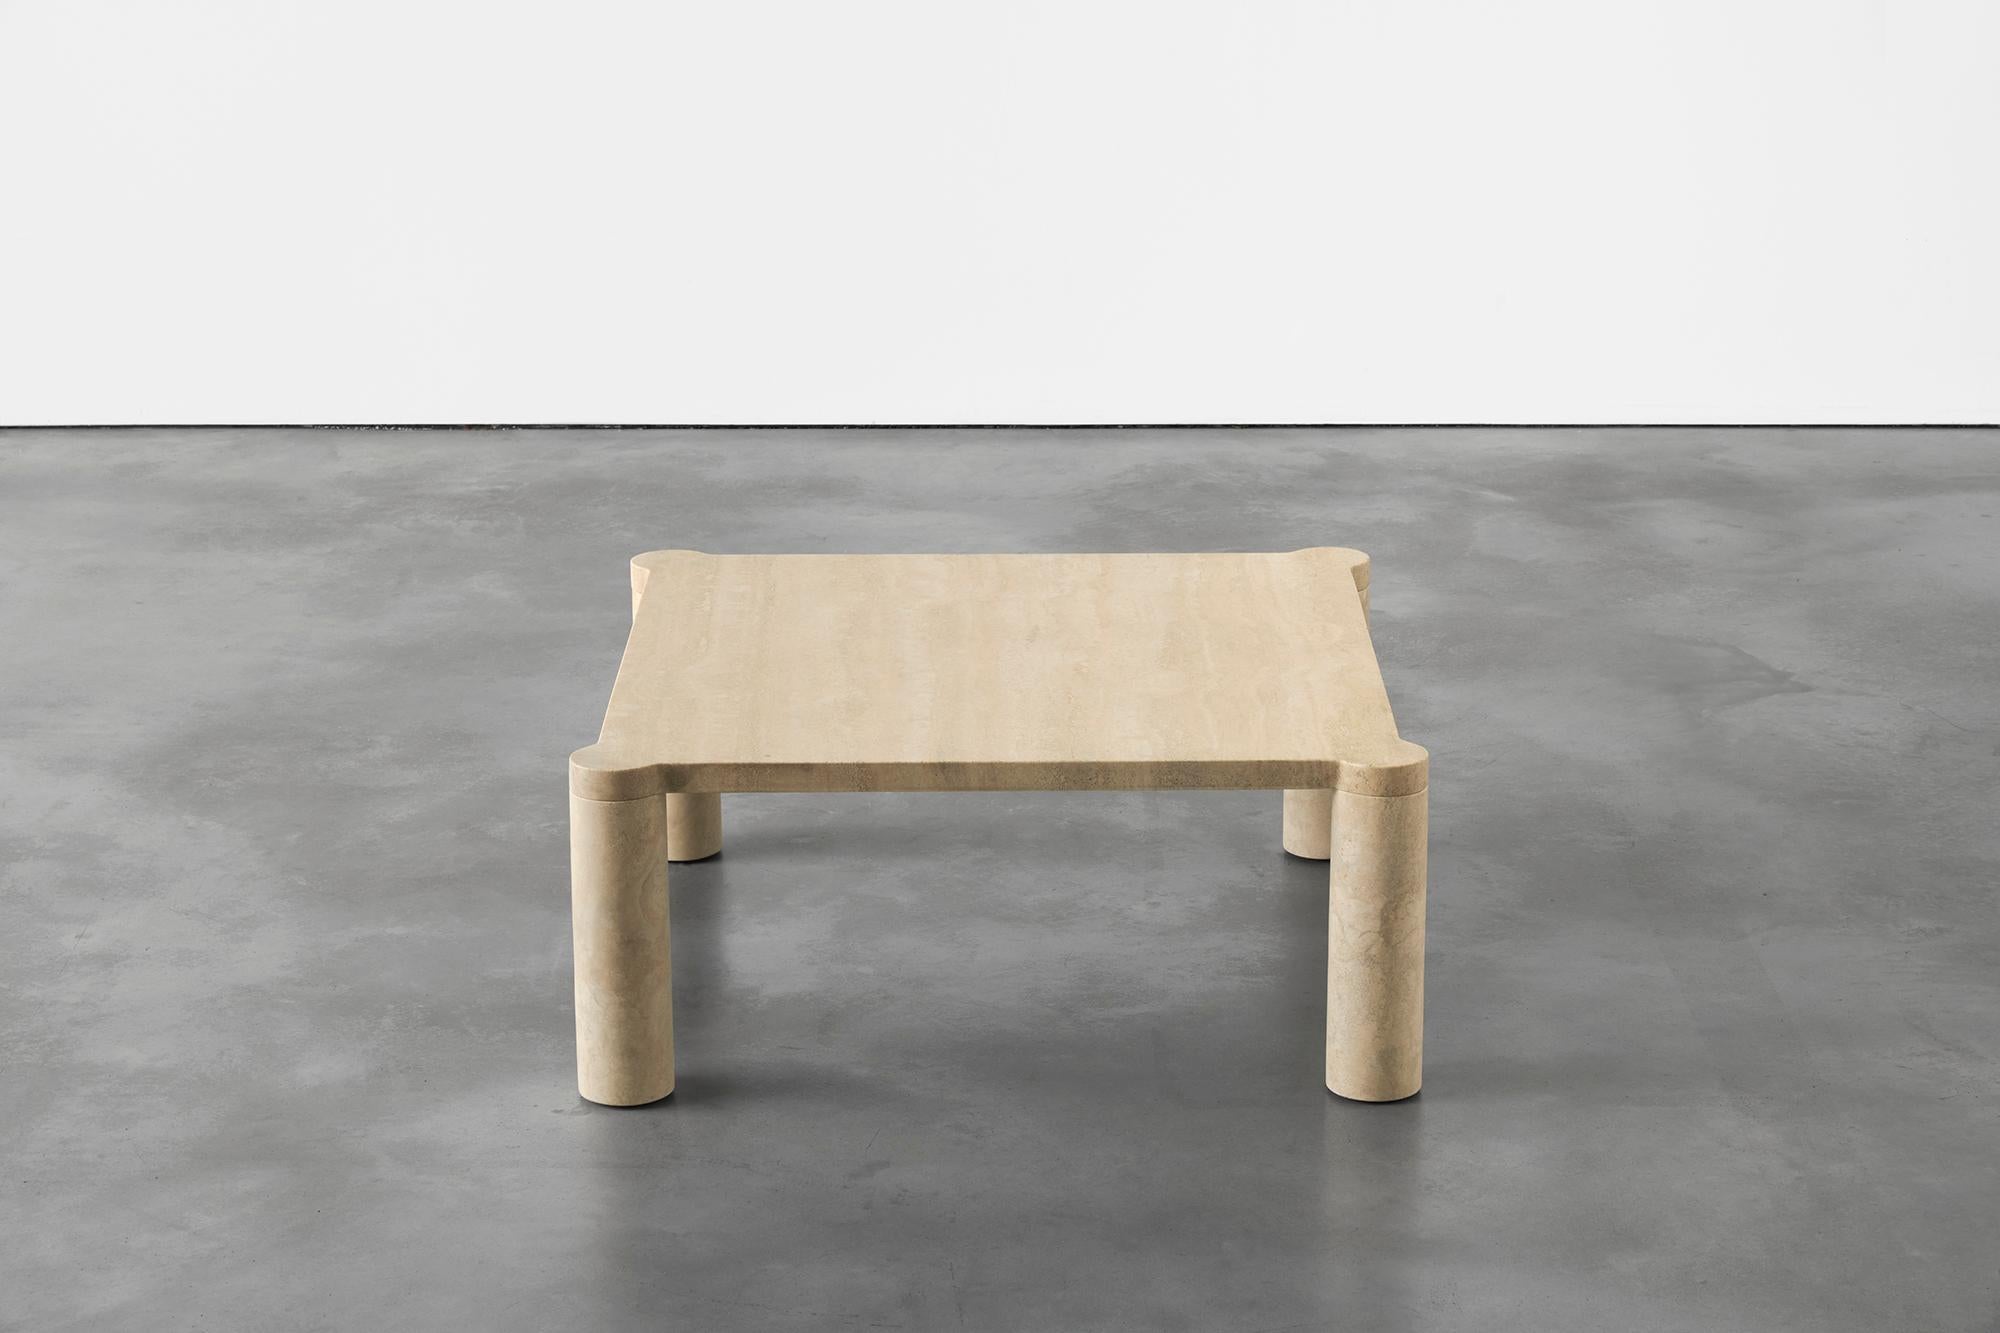 Alessio travertine coffee table by Agglomerati
Dimensions: D 80 x W 80 x H 33 cm
Materials: classic traverine
Available in other stones.

Alessio is a square coffee table enclosed by four cylindrical legs which sit seamlessly flush under the